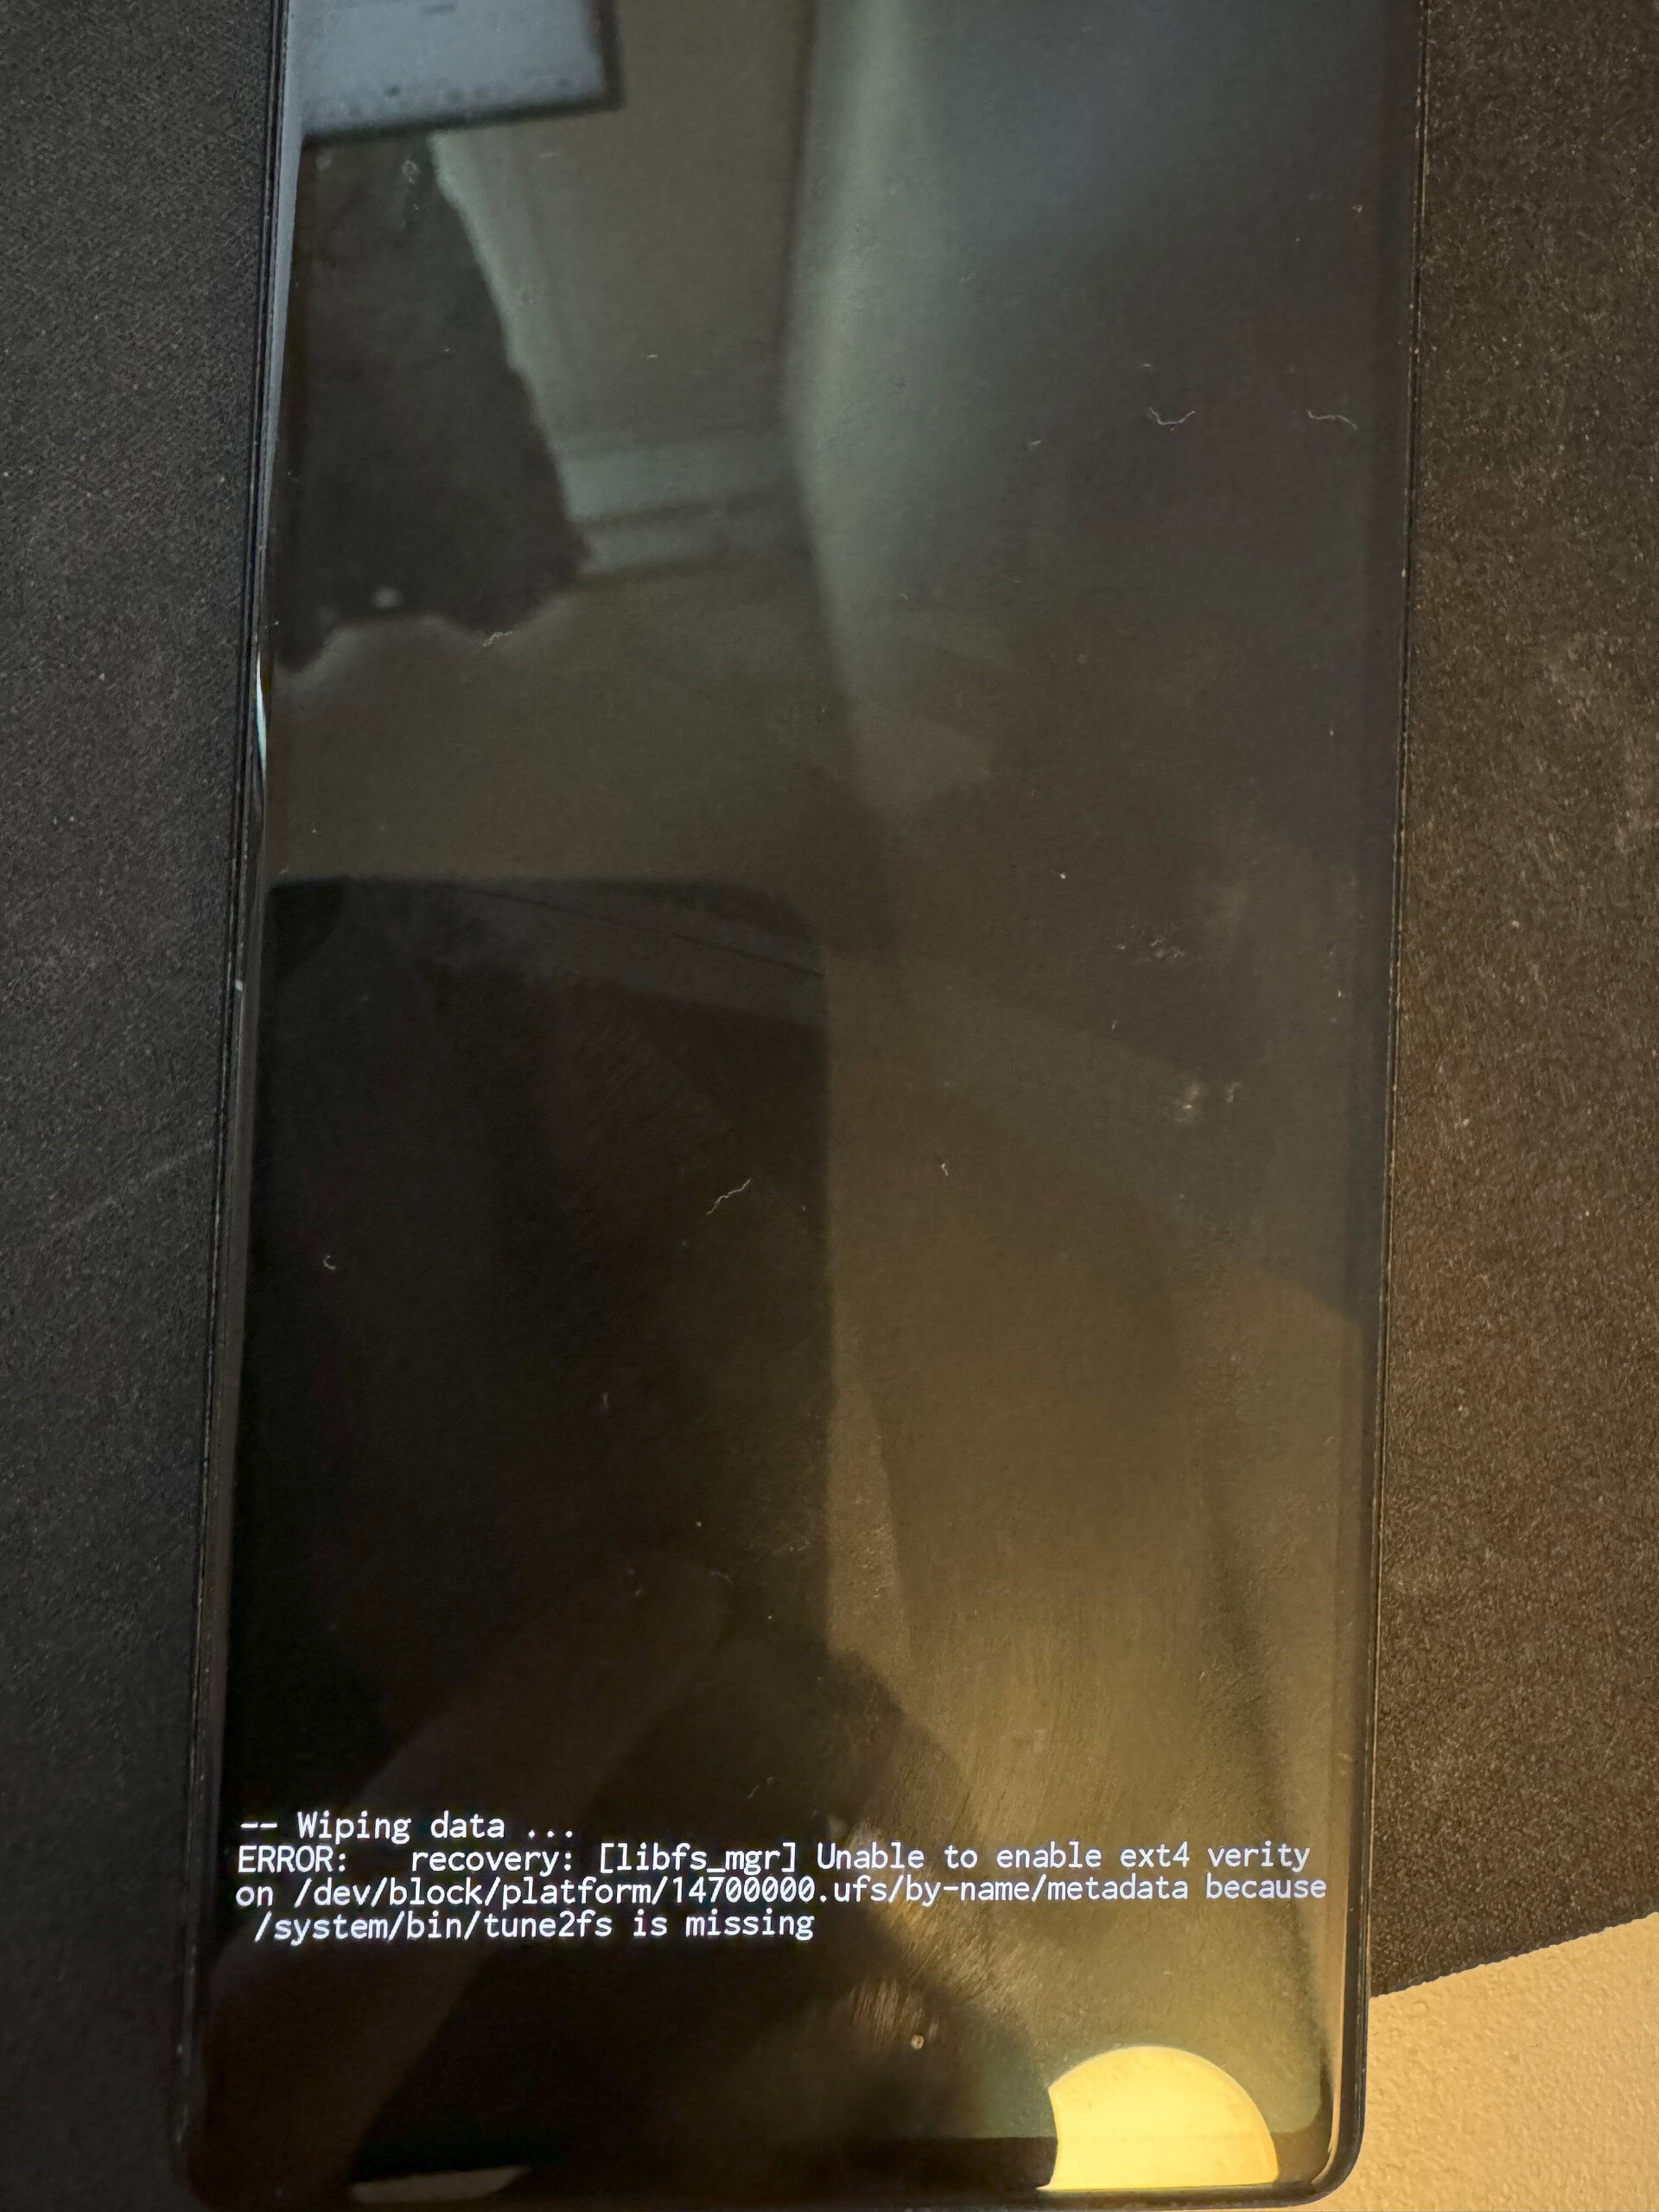 Image showing a bricked Google Pixel 6 with an error message on screen.